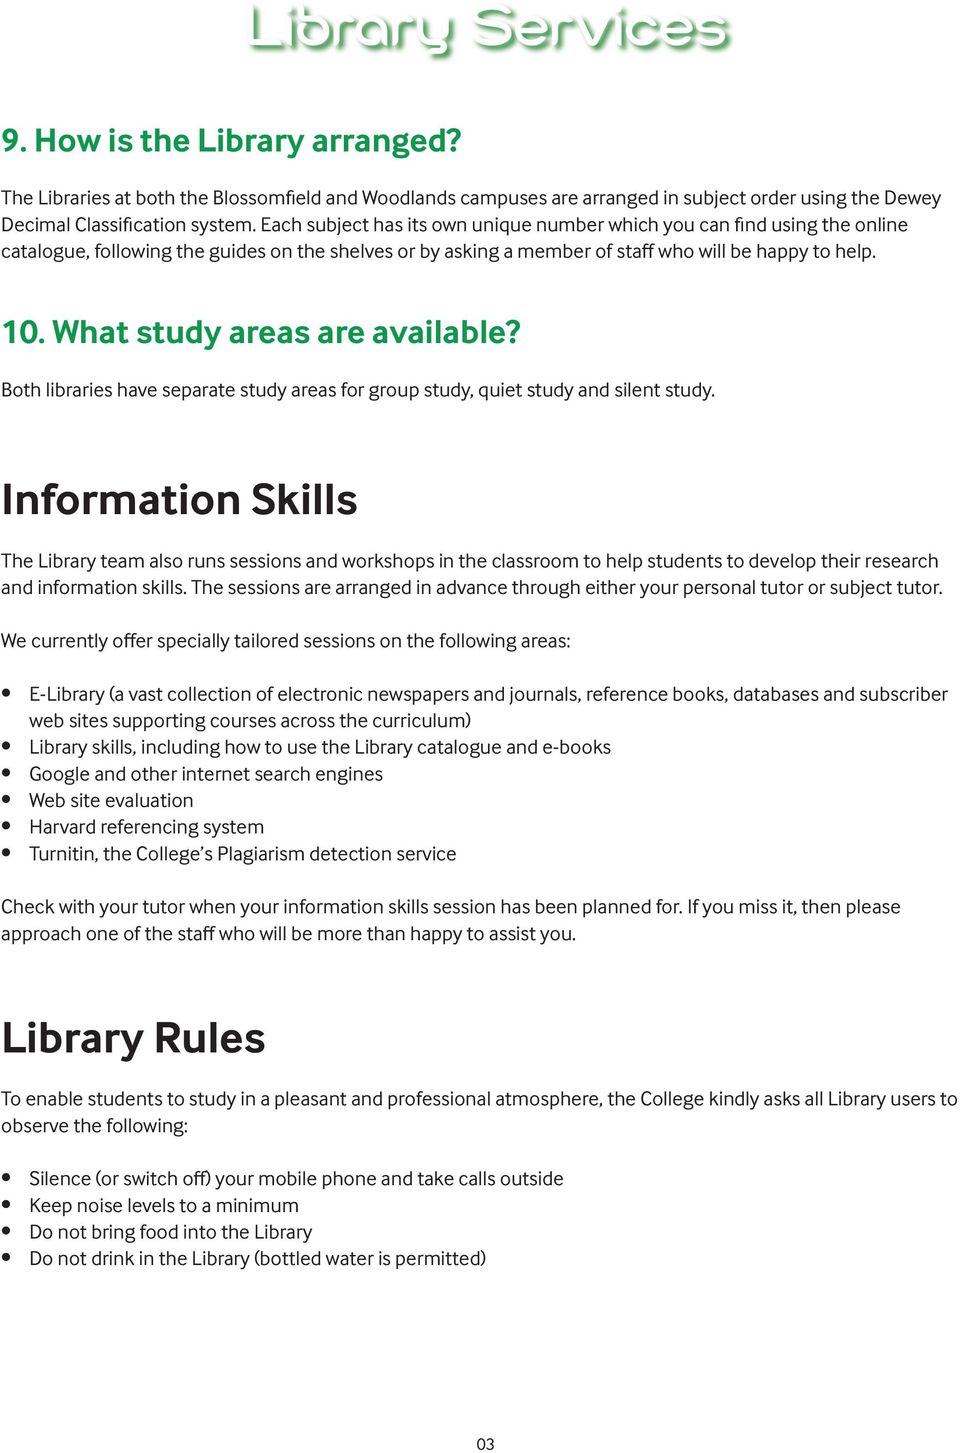 What study areas are available? Both libraries have separate study areas for group study, quiet study and silent study.